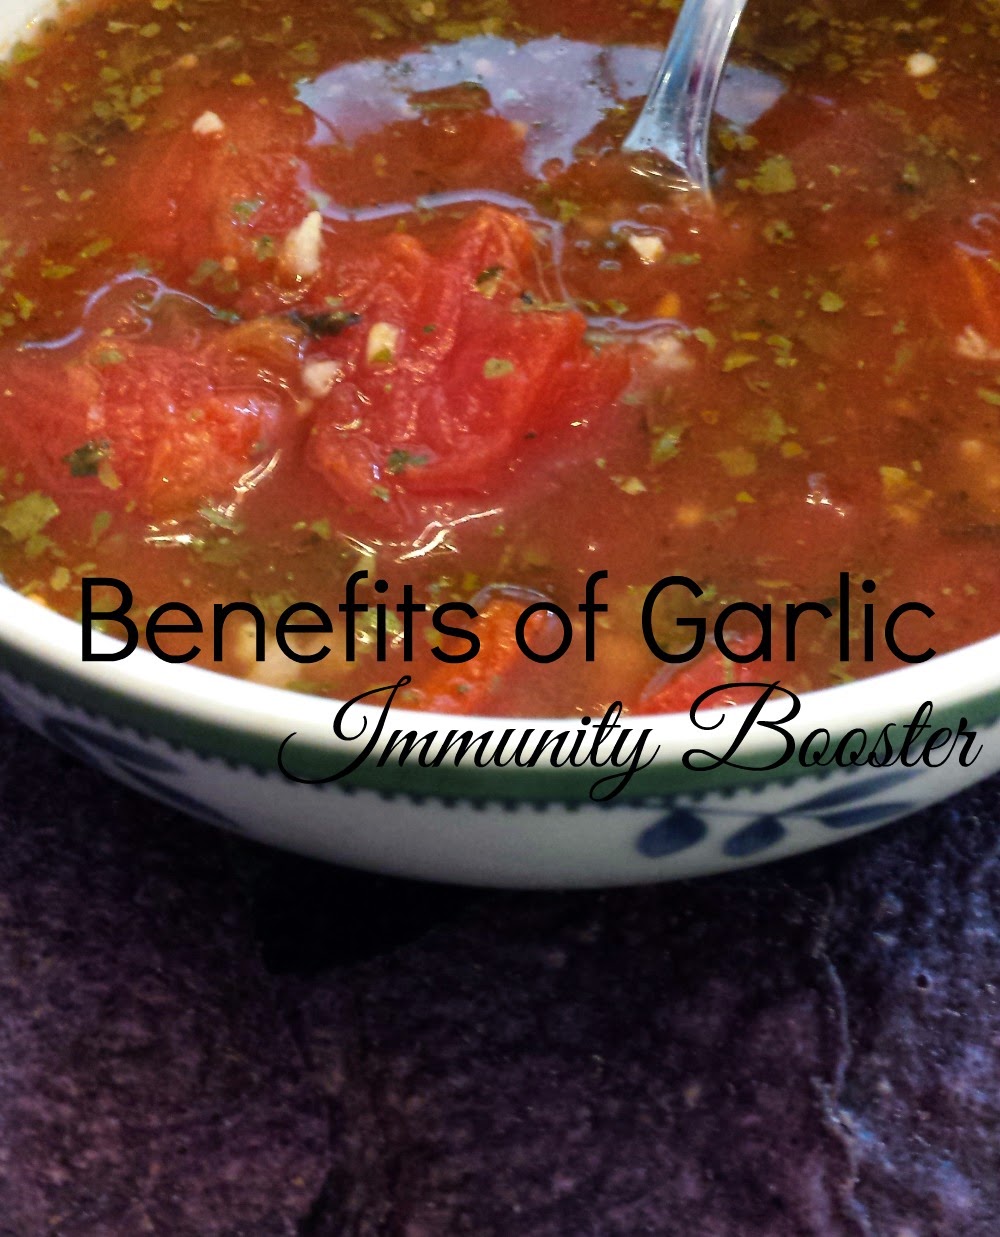 Beth Shaw's, author of YogaLean, recipe for immunity soup